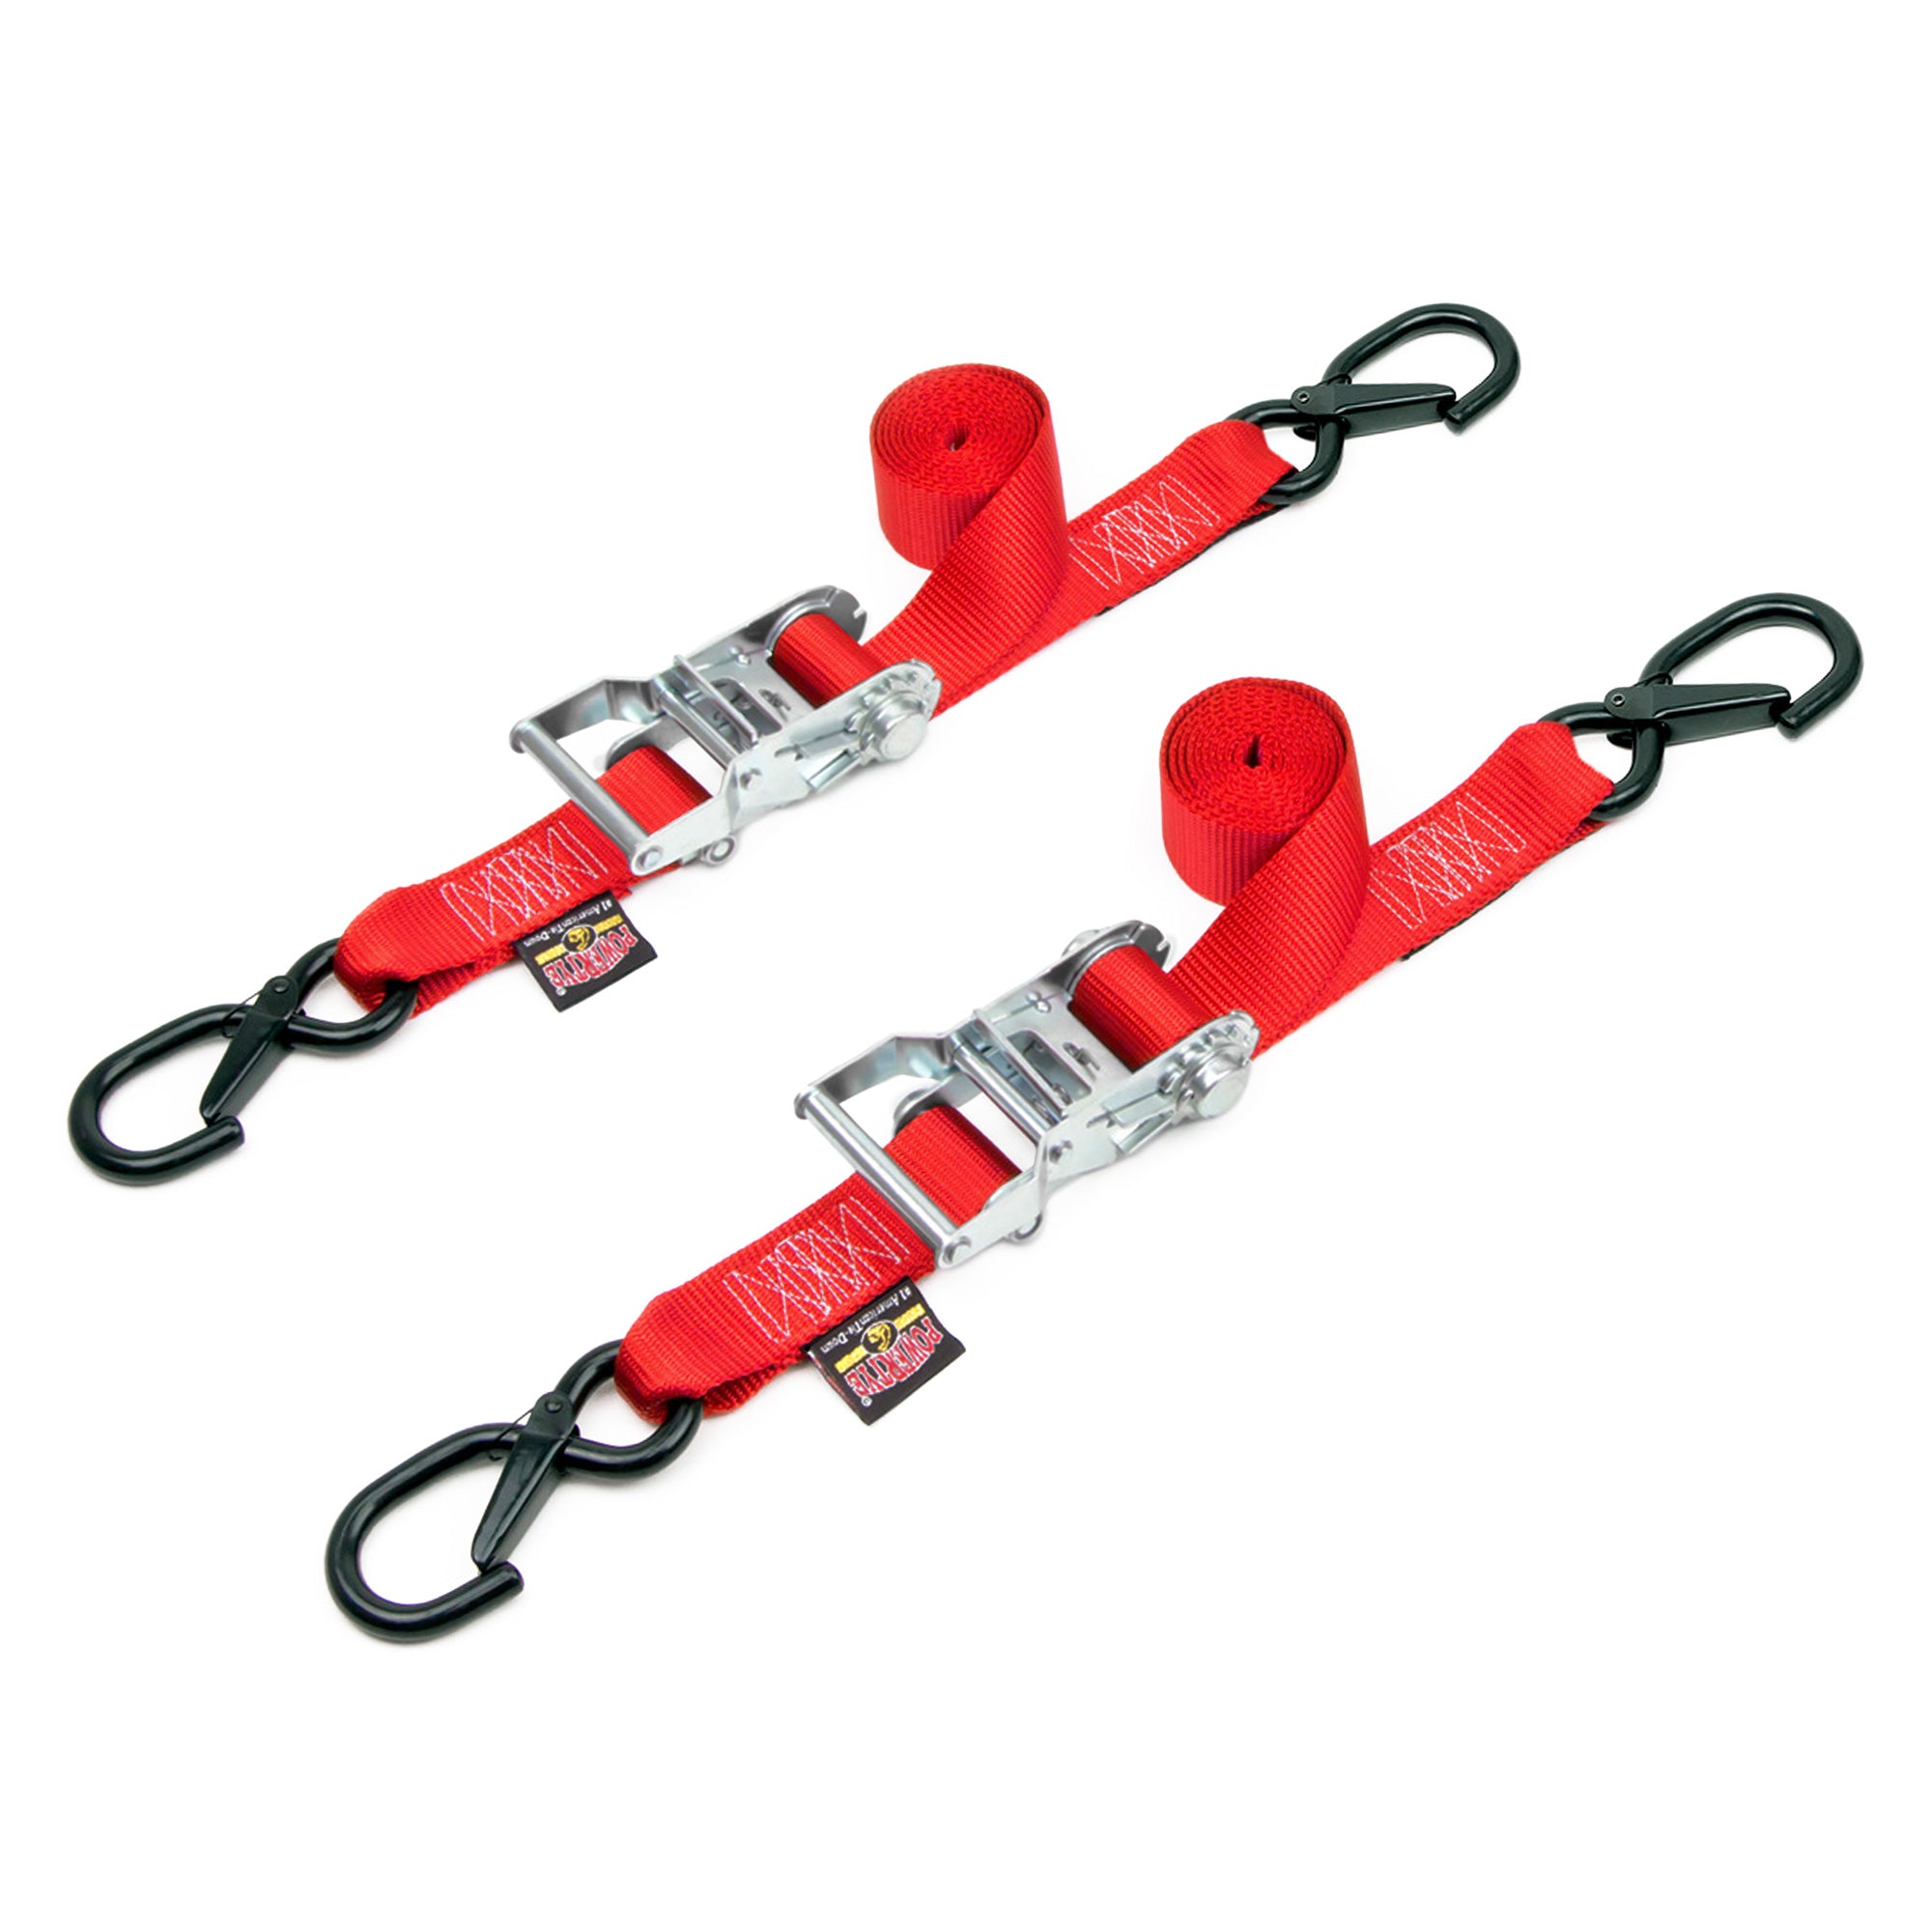  Vtete 2 Pcs Adjustable Bimini Top Straps with All 2 Snap Hooks  on Each End (Not Need to Sewn It) - Marine & Awning Webbing Straps with  Loops + Eye Straps 